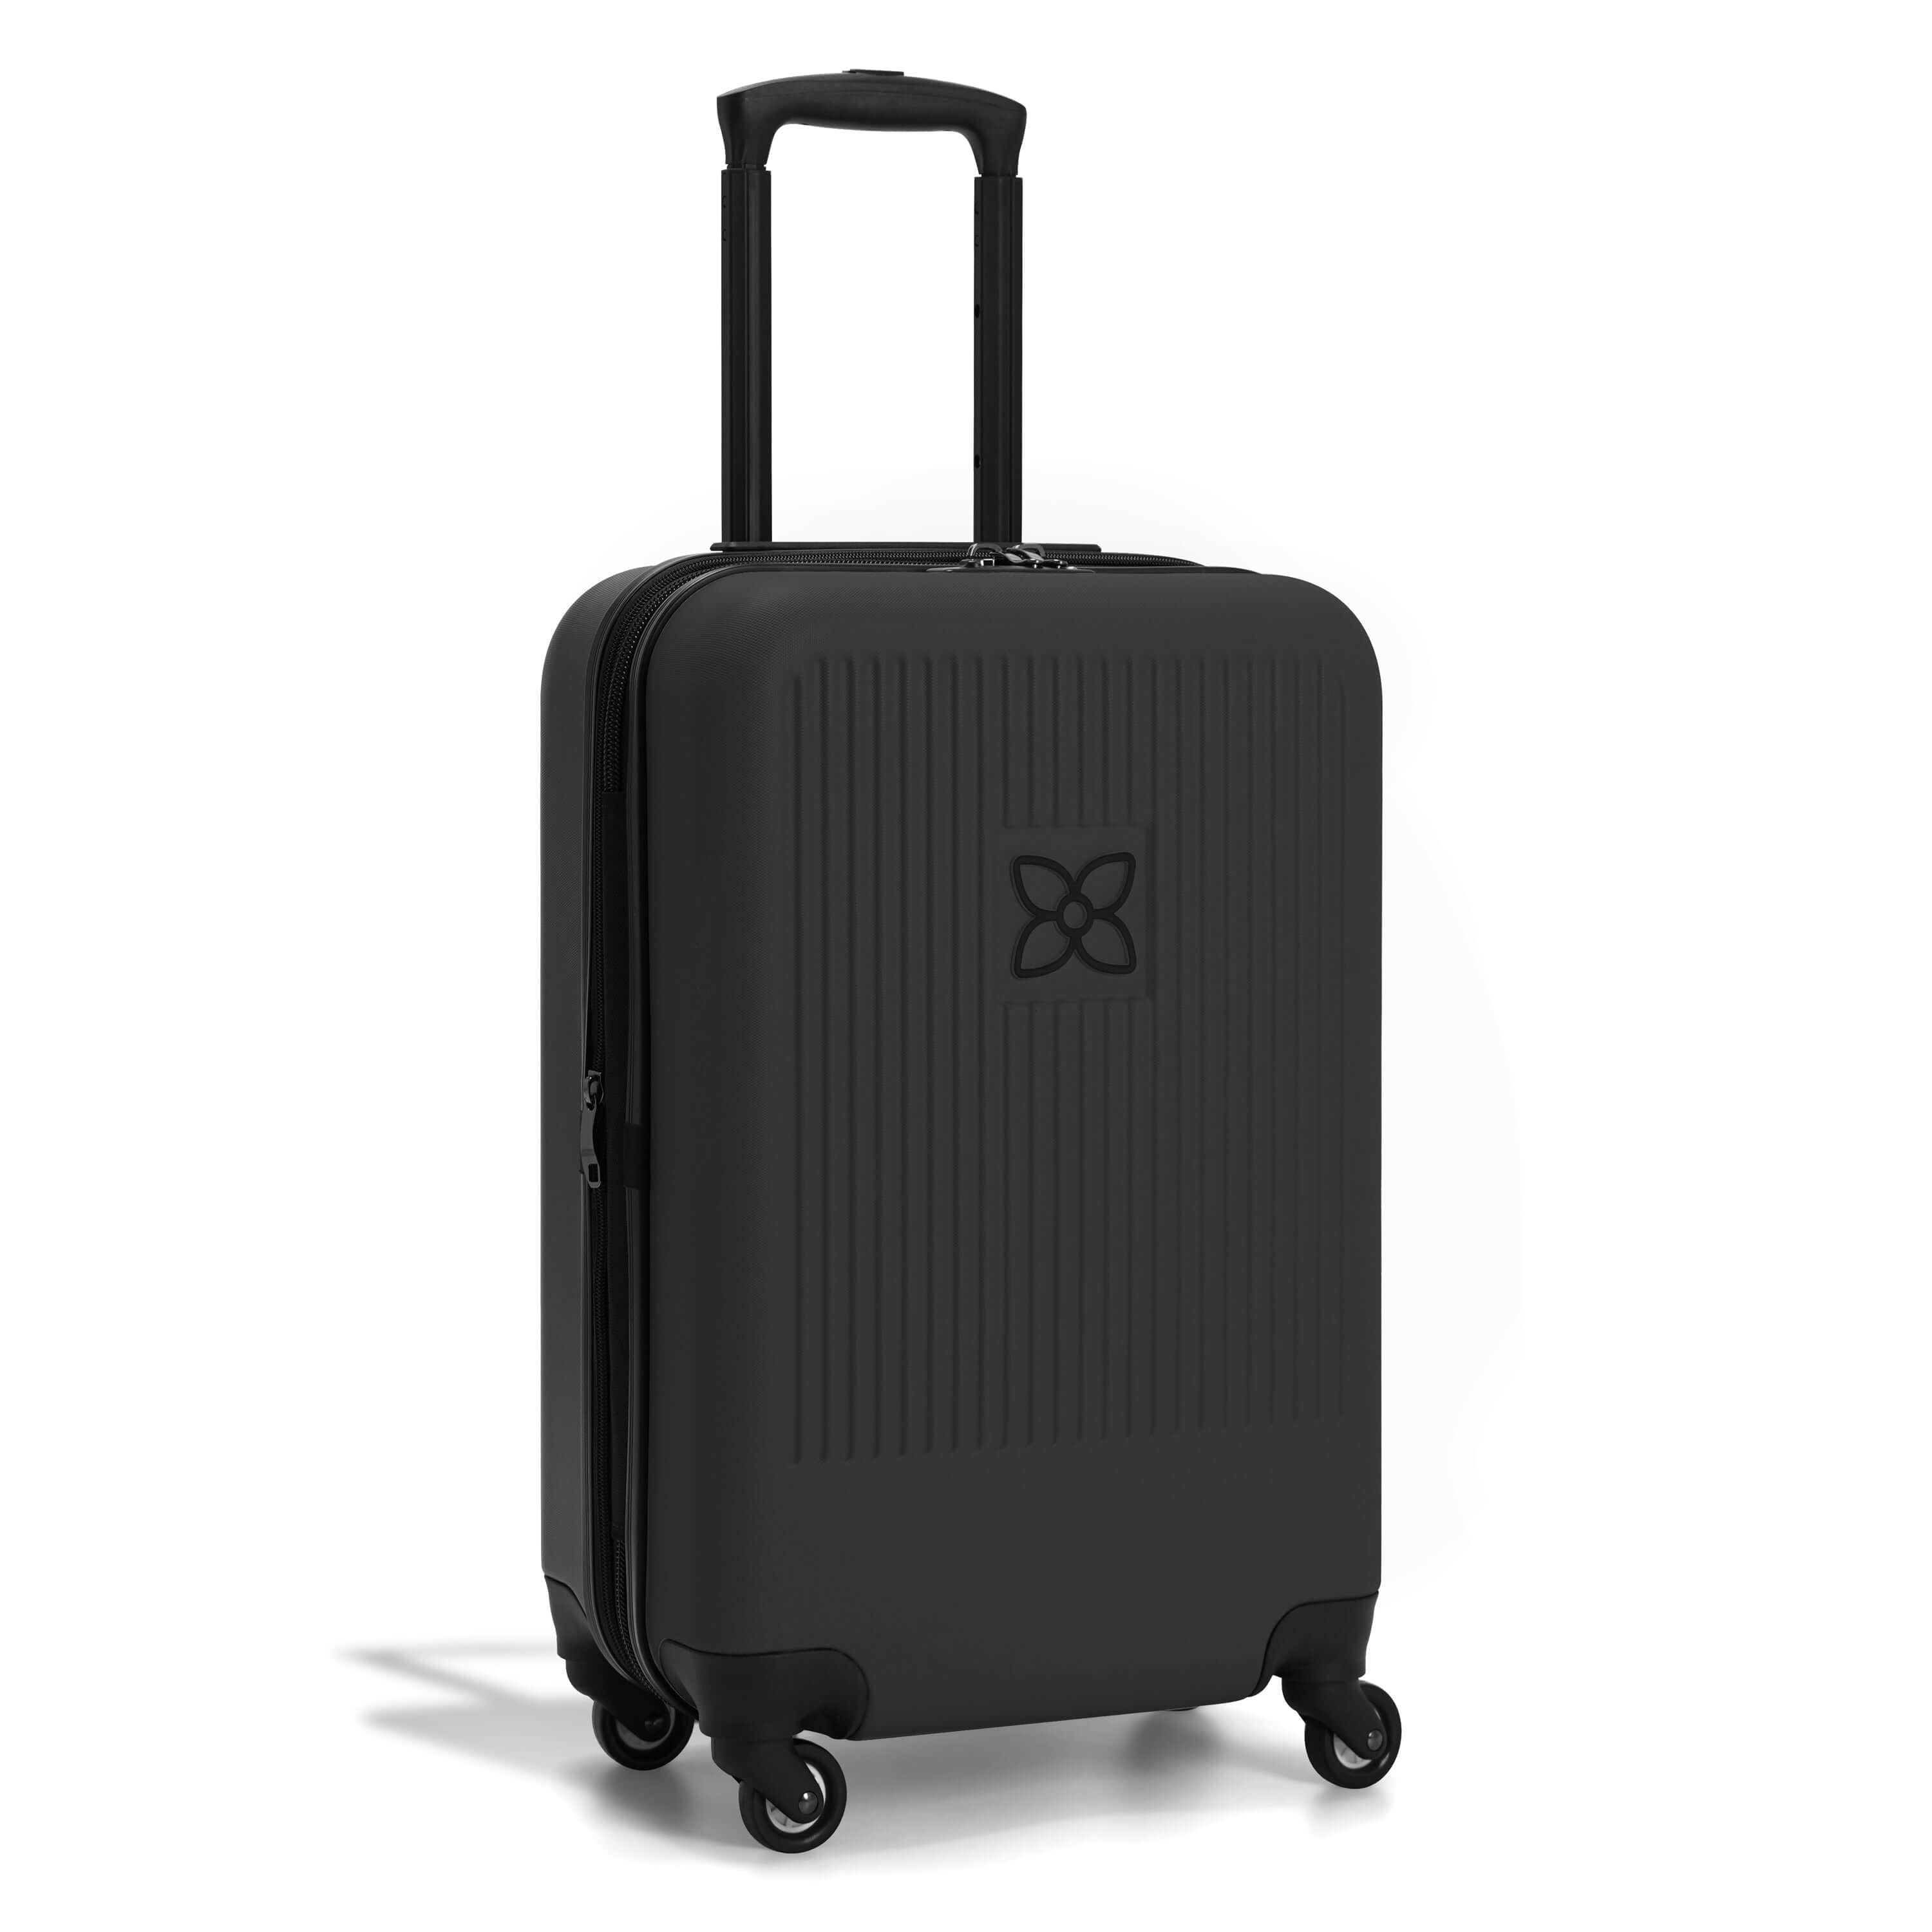 Angled front view of Sherpani hard-shell carry-on luggage, the Meridian in Black. Meridian features include a retractable luggage handle, uncrushable exterior, TSA-approved locking zippers and four 360-degree spinner wheels.